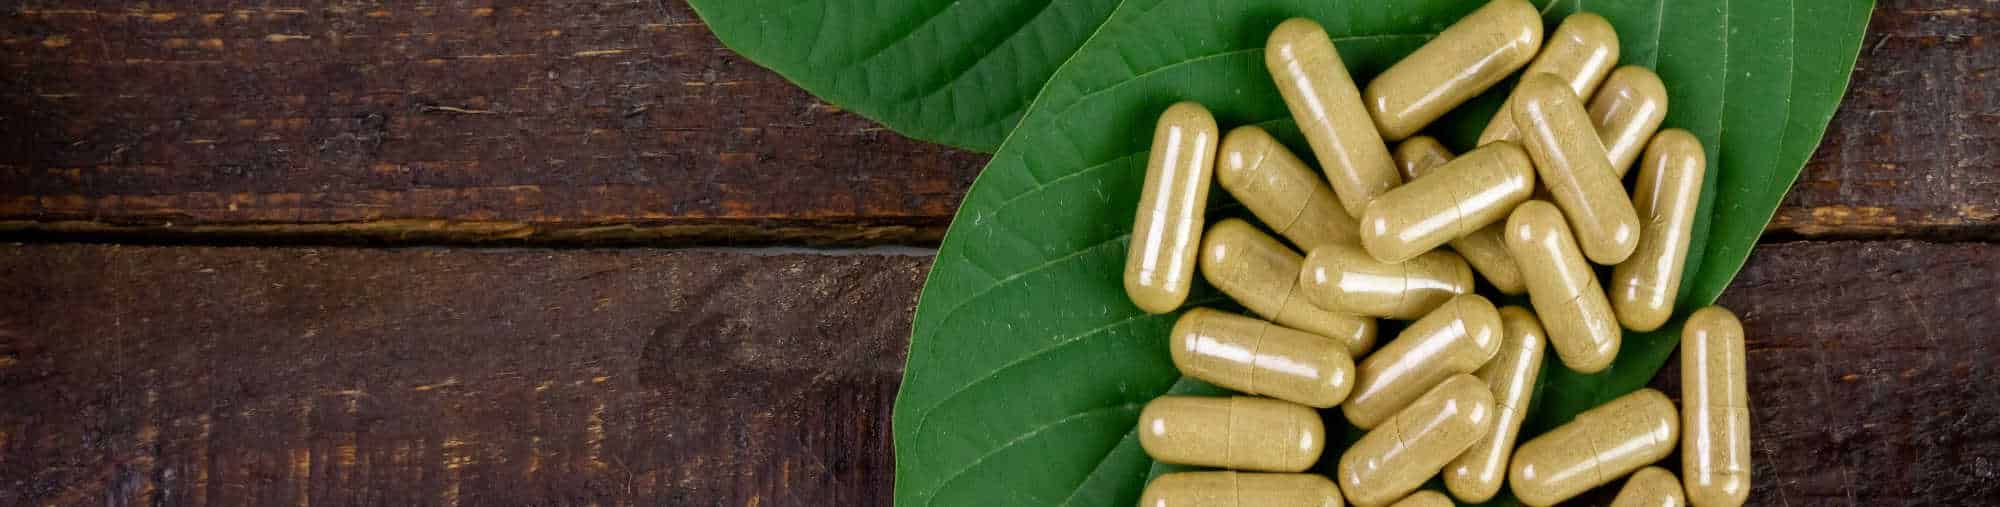 image of kratom products